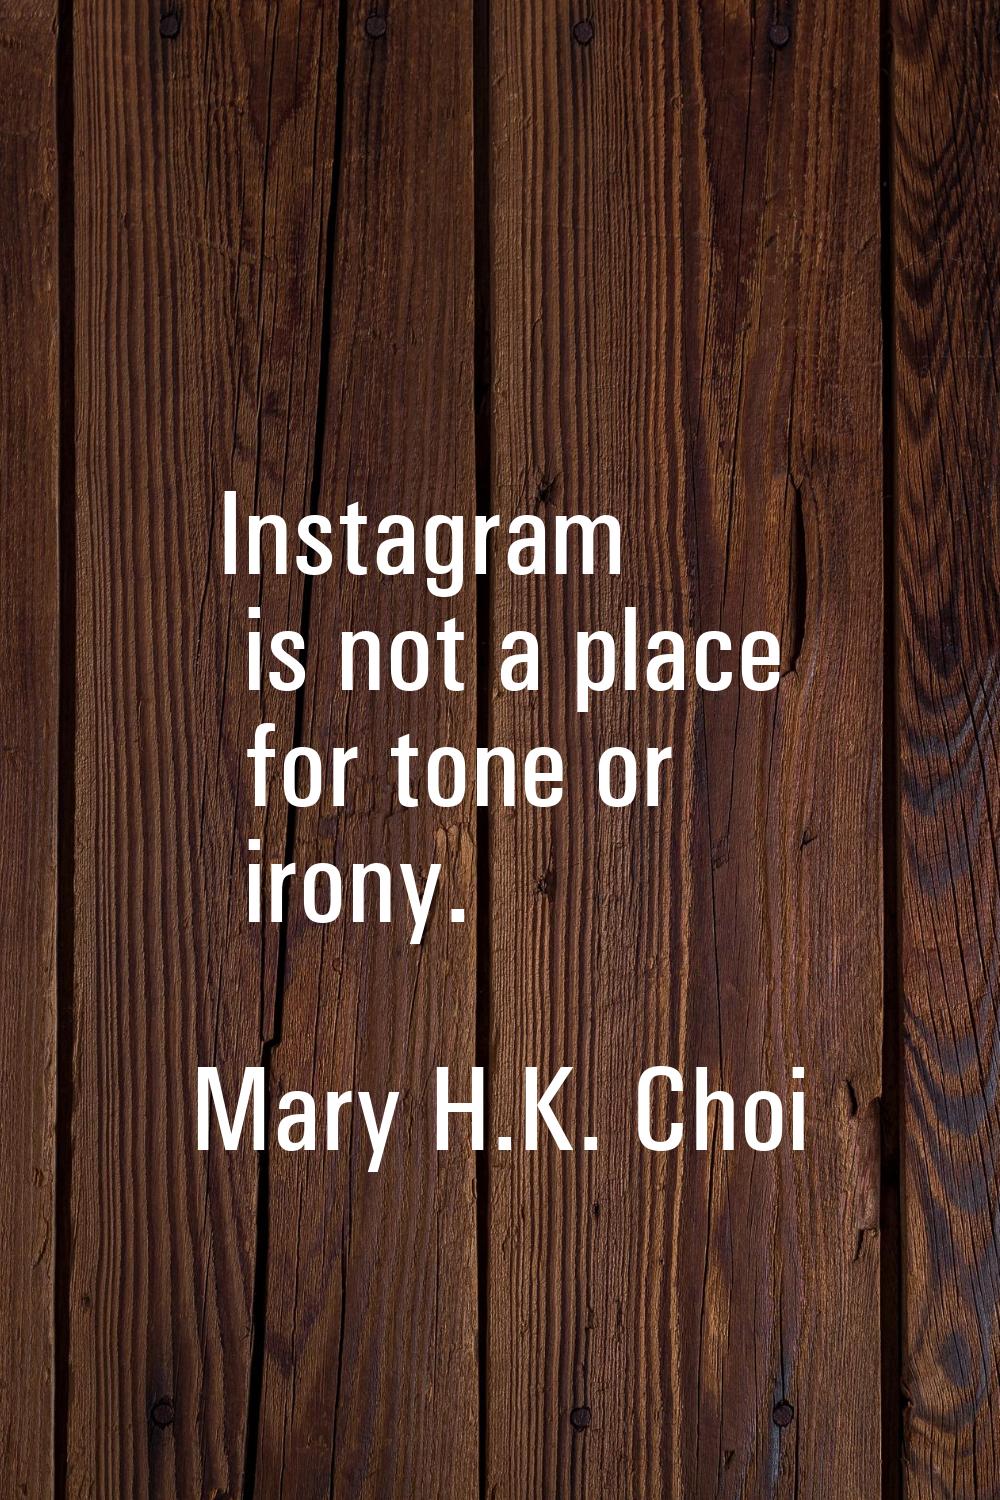 Instagram is not a place for tone or irony.